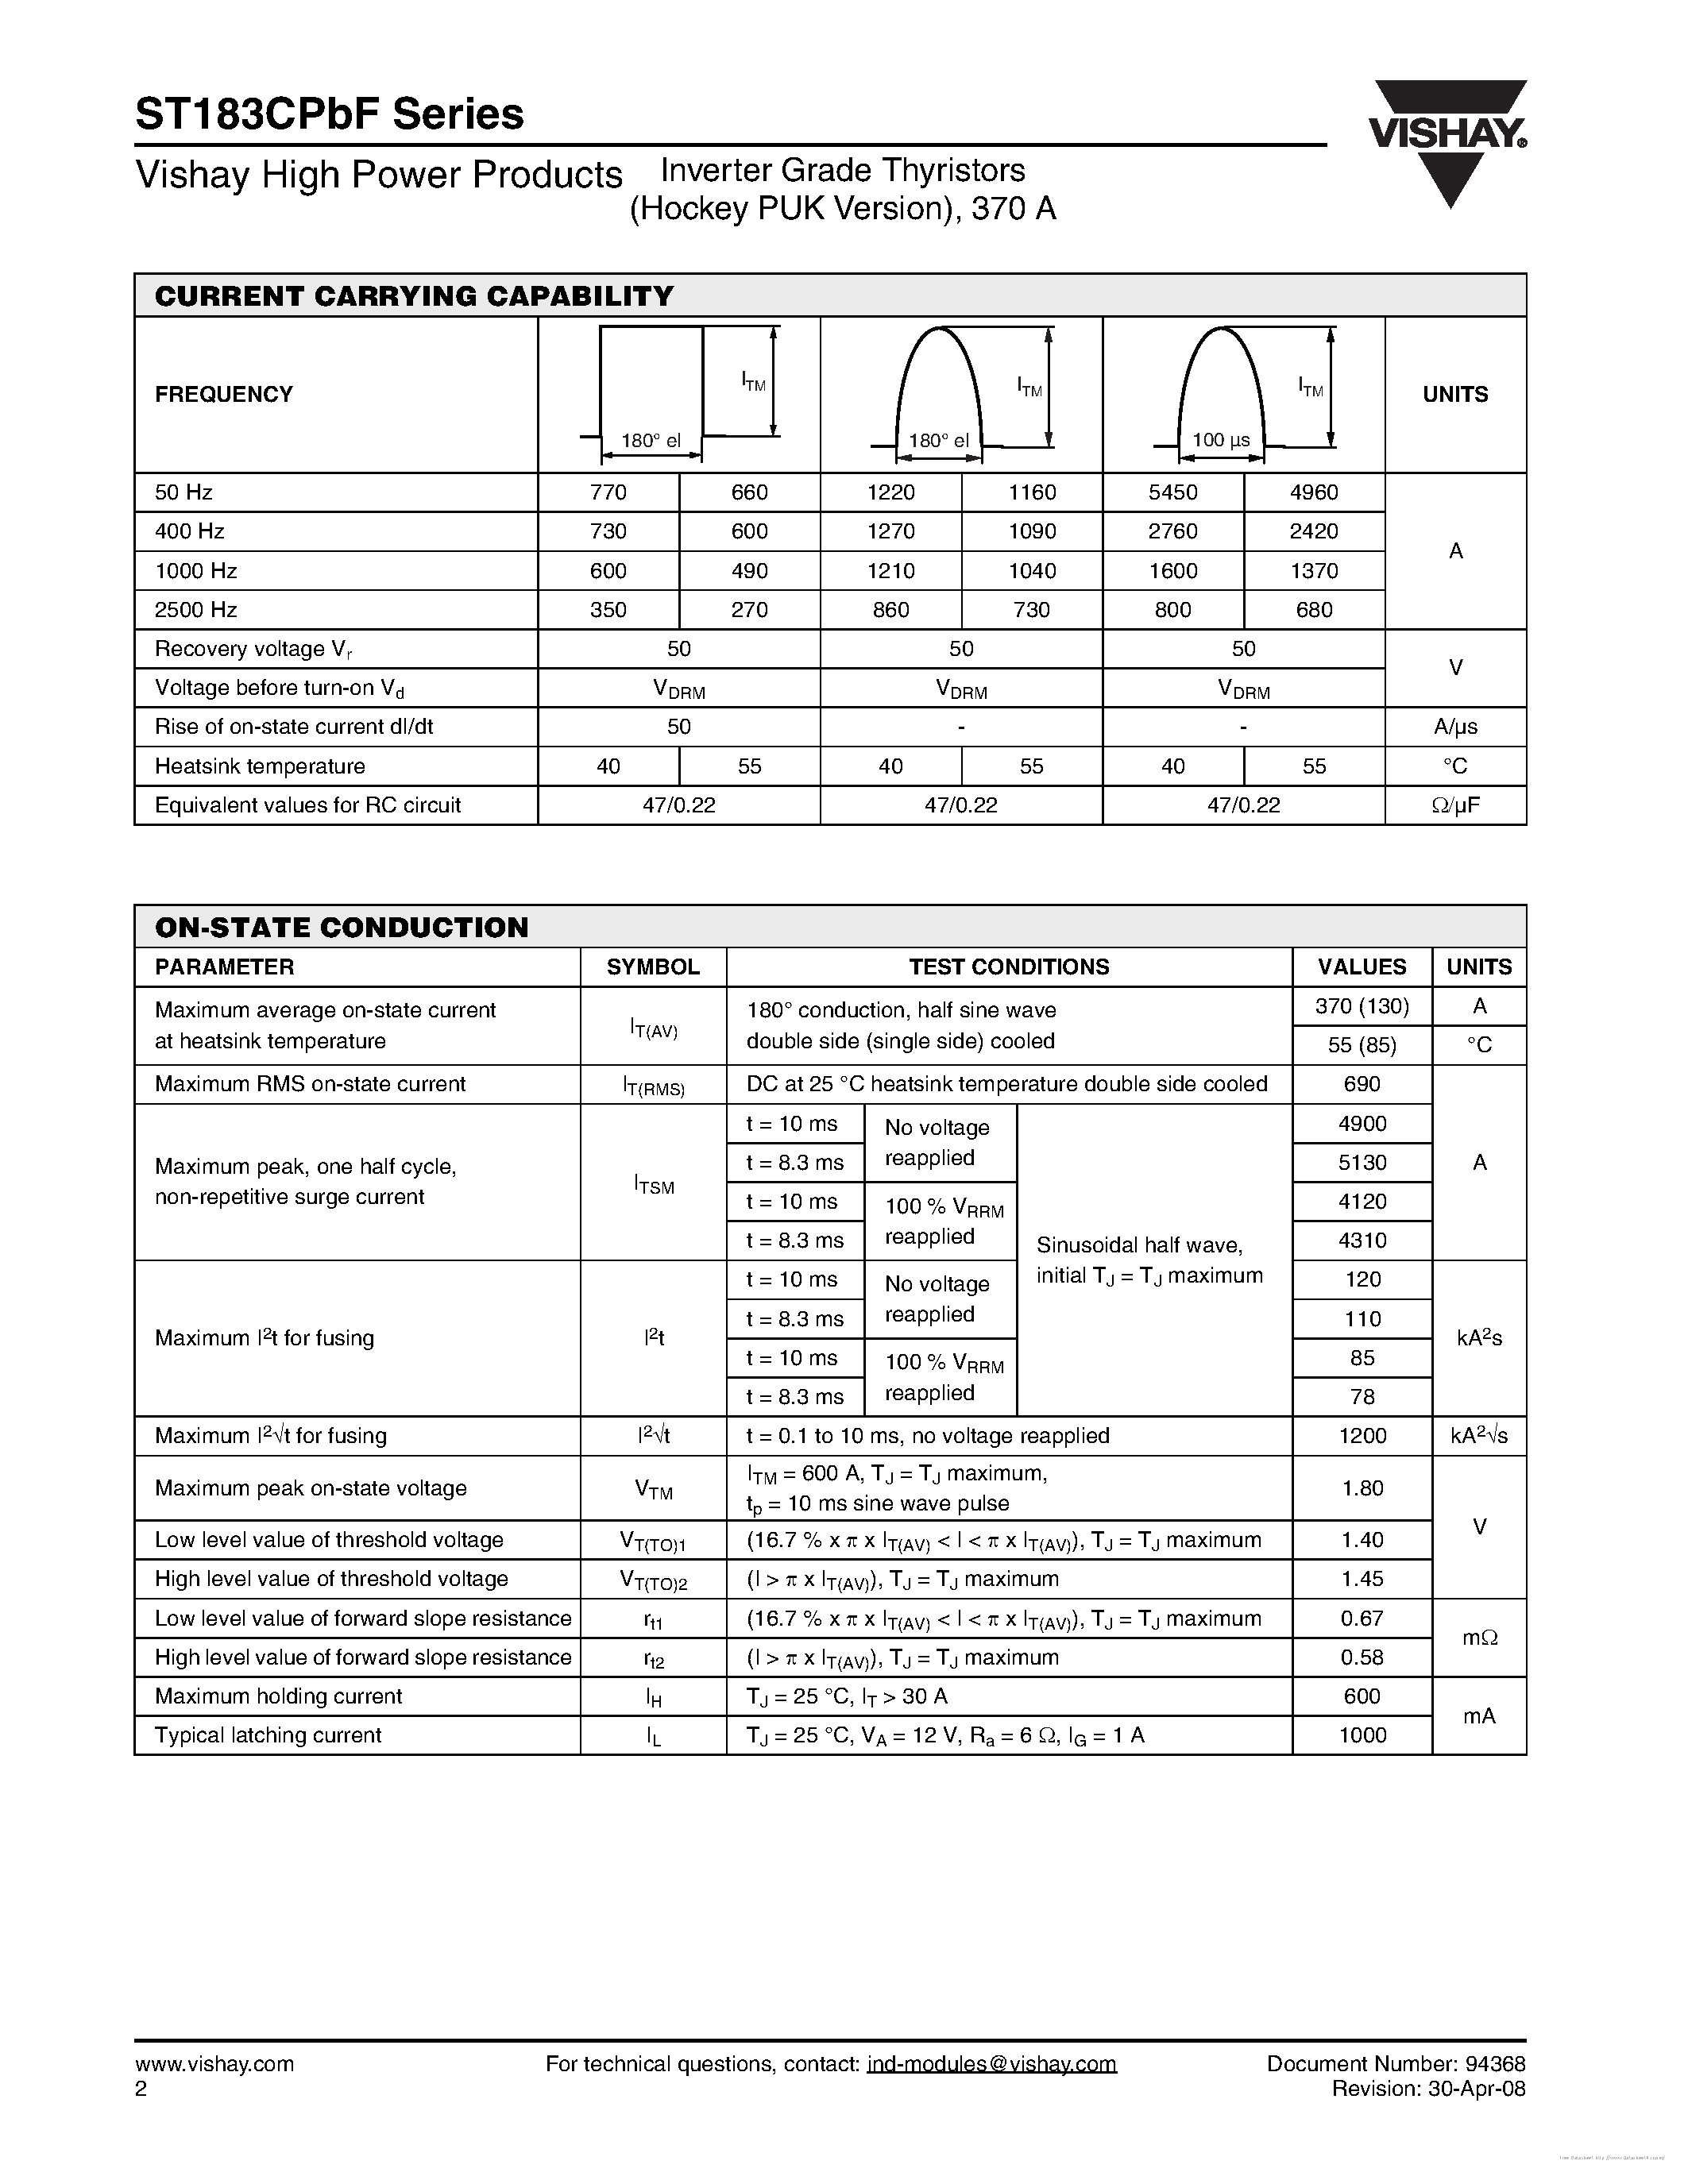 Datasheet ST183CPBF - page 2